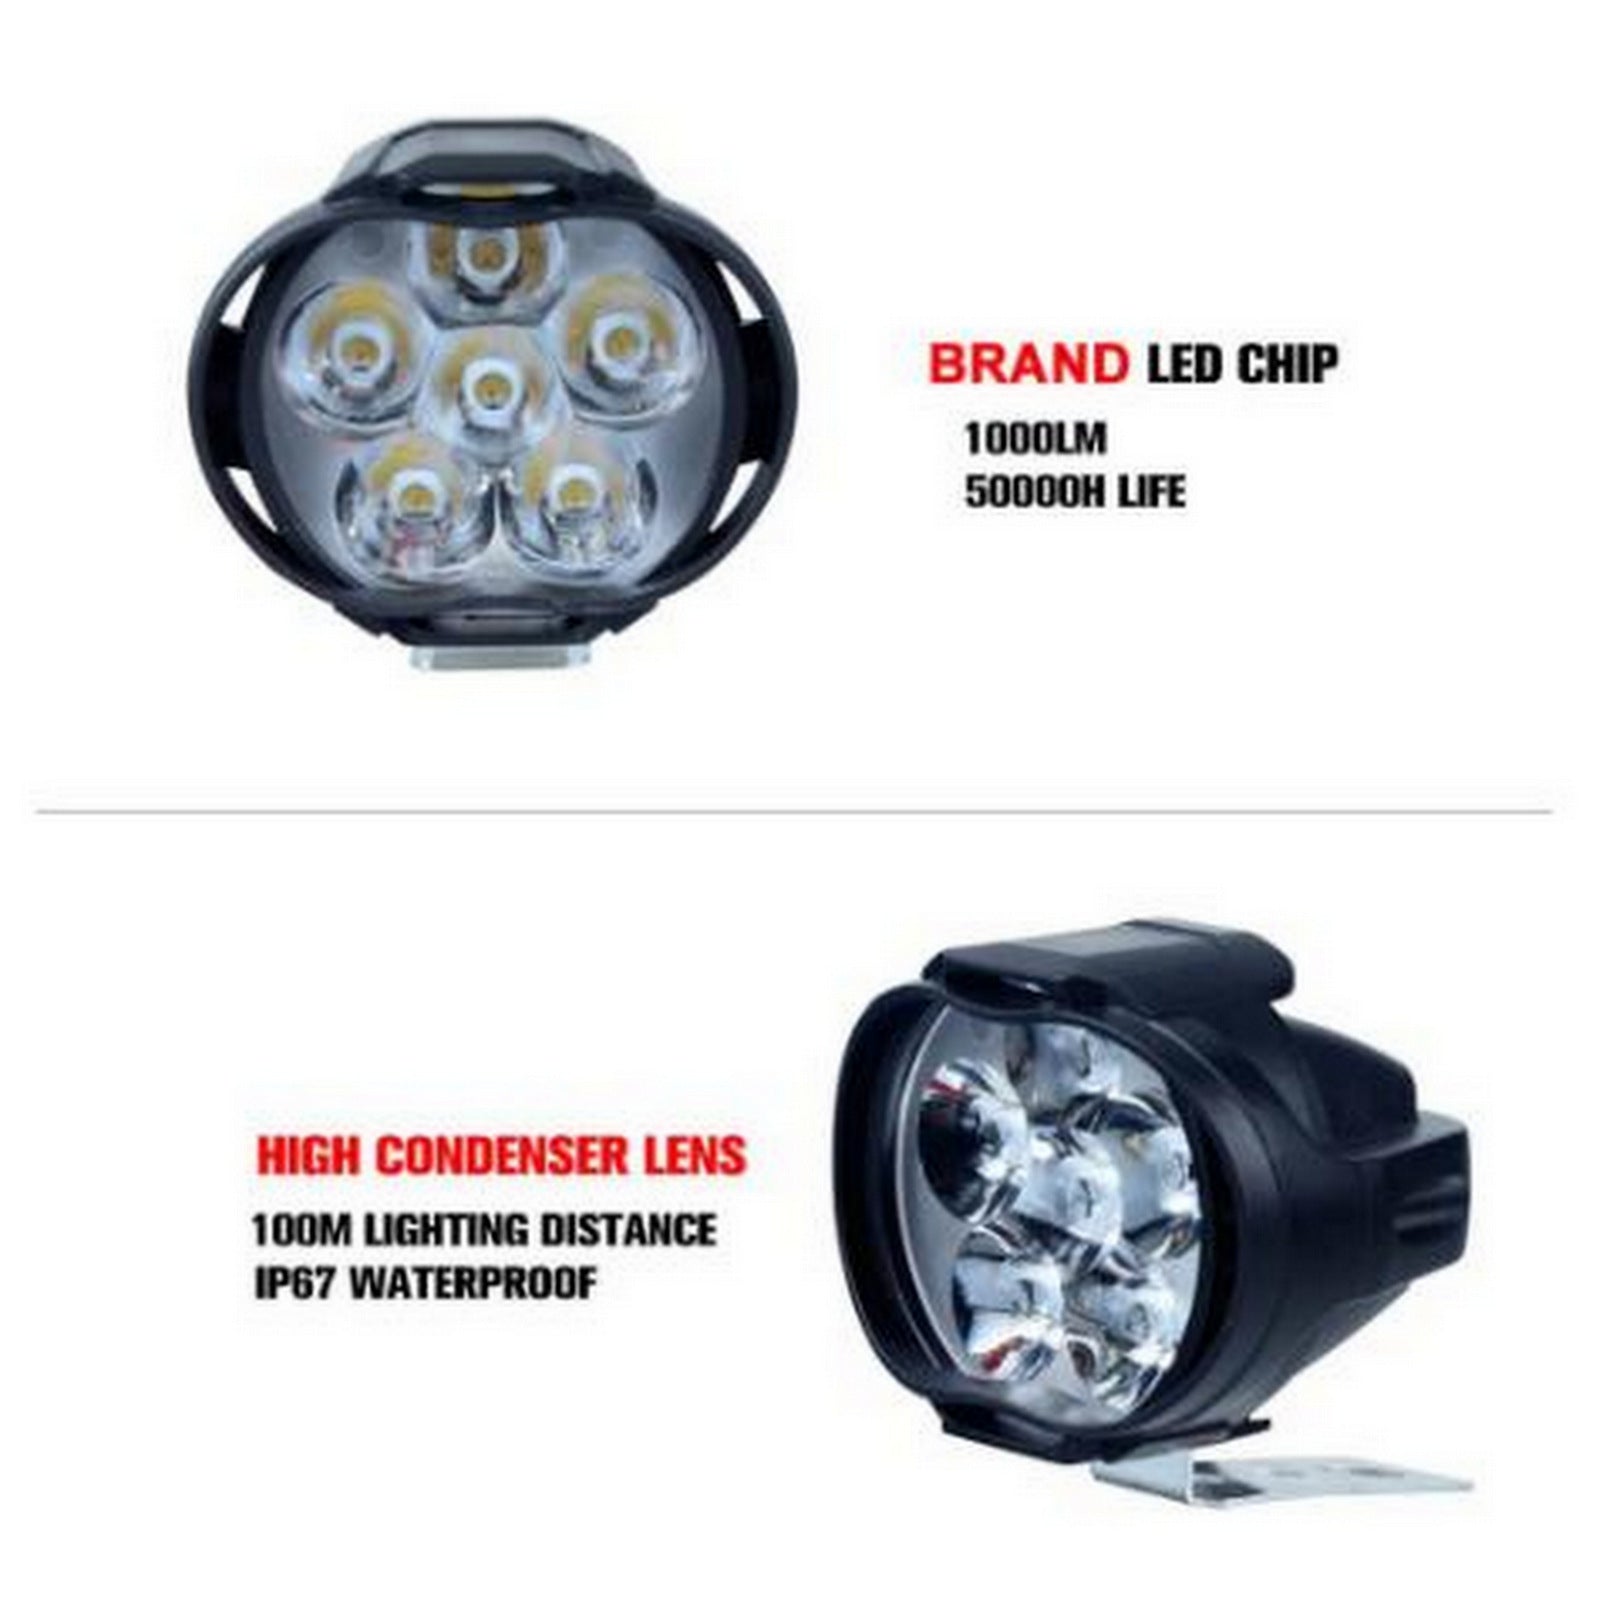 LED HEAD LIGHTS ASSEMBLY 2 PIECES FOR MOTORCYCLE